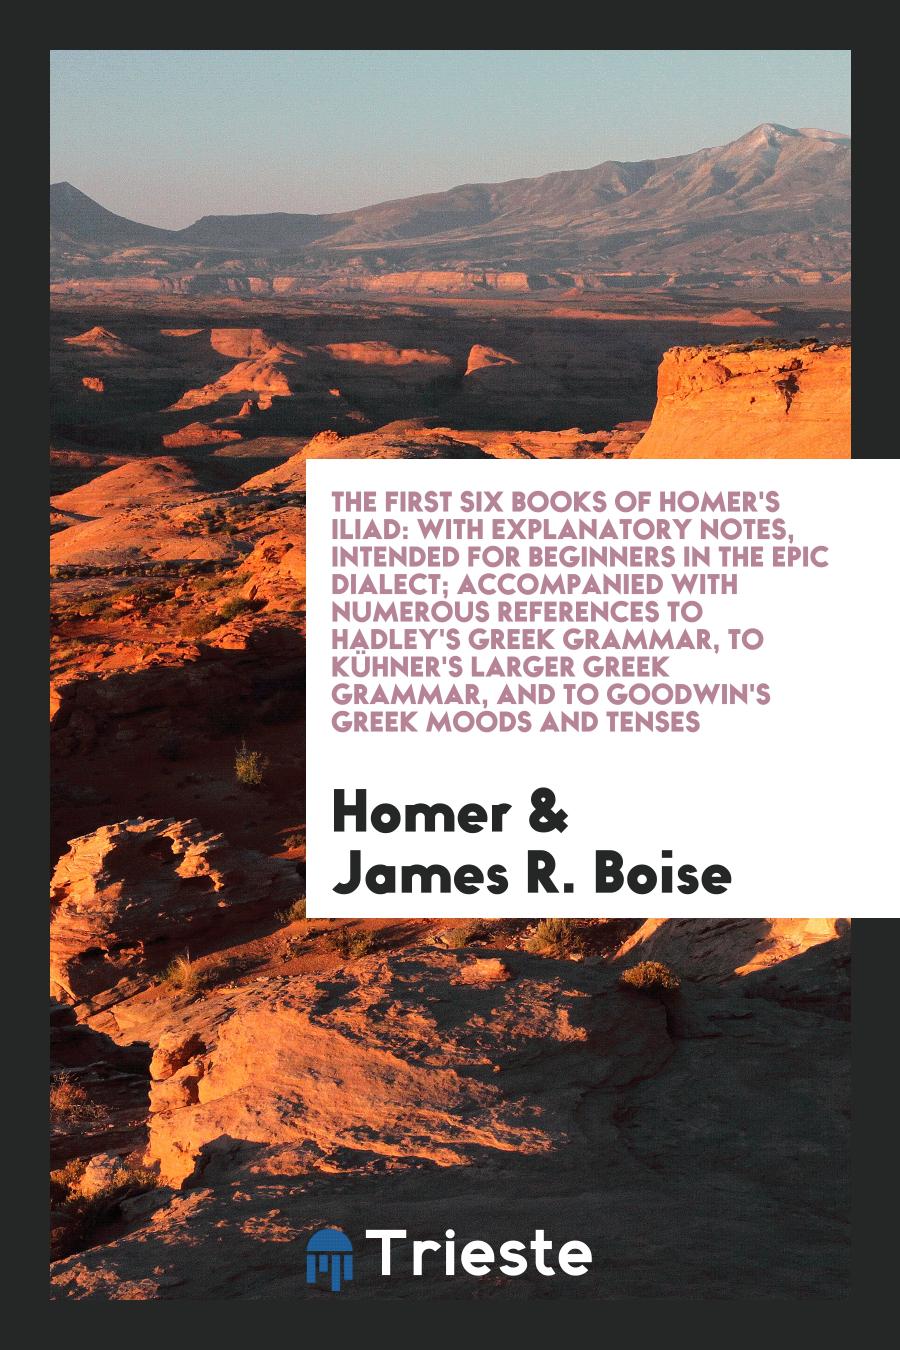 The First Six Books of Homer's Iliad: With Explanatory Notes, Intended for Beginners in the Epic Dialect; Accompanied with Numerous References to Hadley's Greek Grammar, to Kühner's Larger Greek Grammar, and to Goodwin's Greek Moods and Tenses